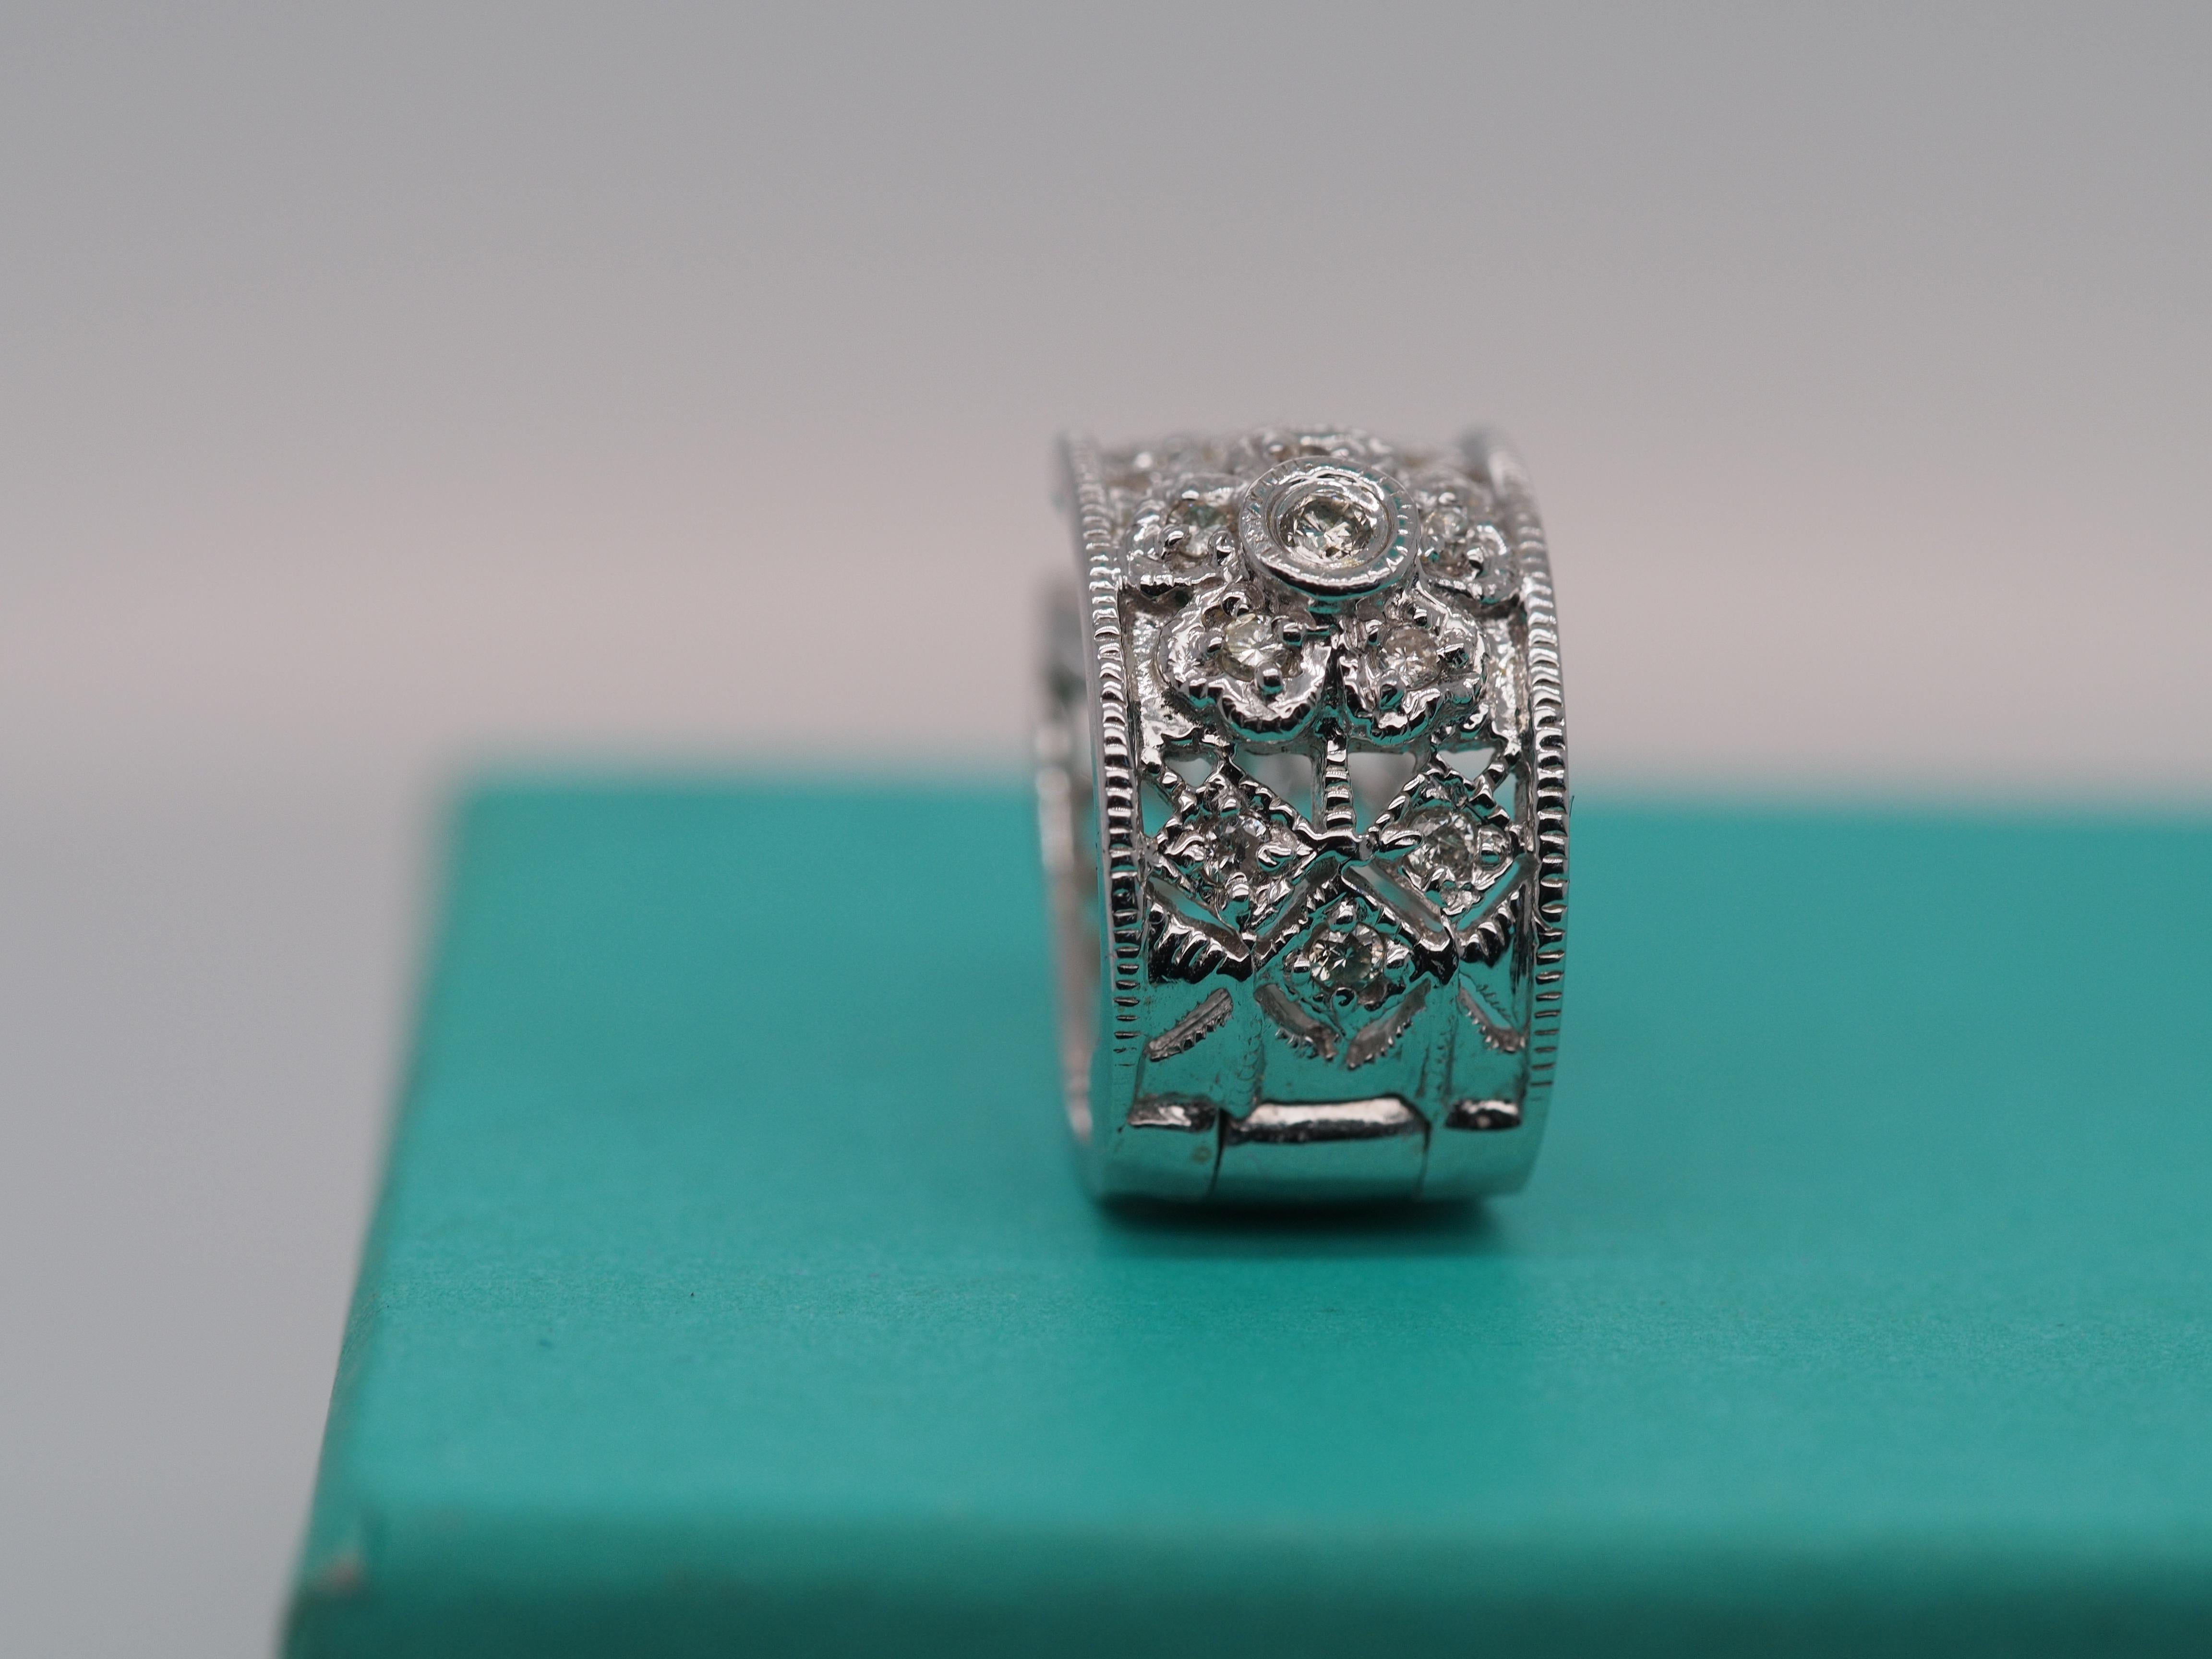 Item Details:
Metal Type: 14K White Gold [Hallmarked, and Tested]
Weight: 5.80 grams
Diamond Details:
Weight: .25ct, total weight
Cut: Round Brilliant
Color: G
Clarity: SI
Measurements: .5inch diameter
Condition: Excellent